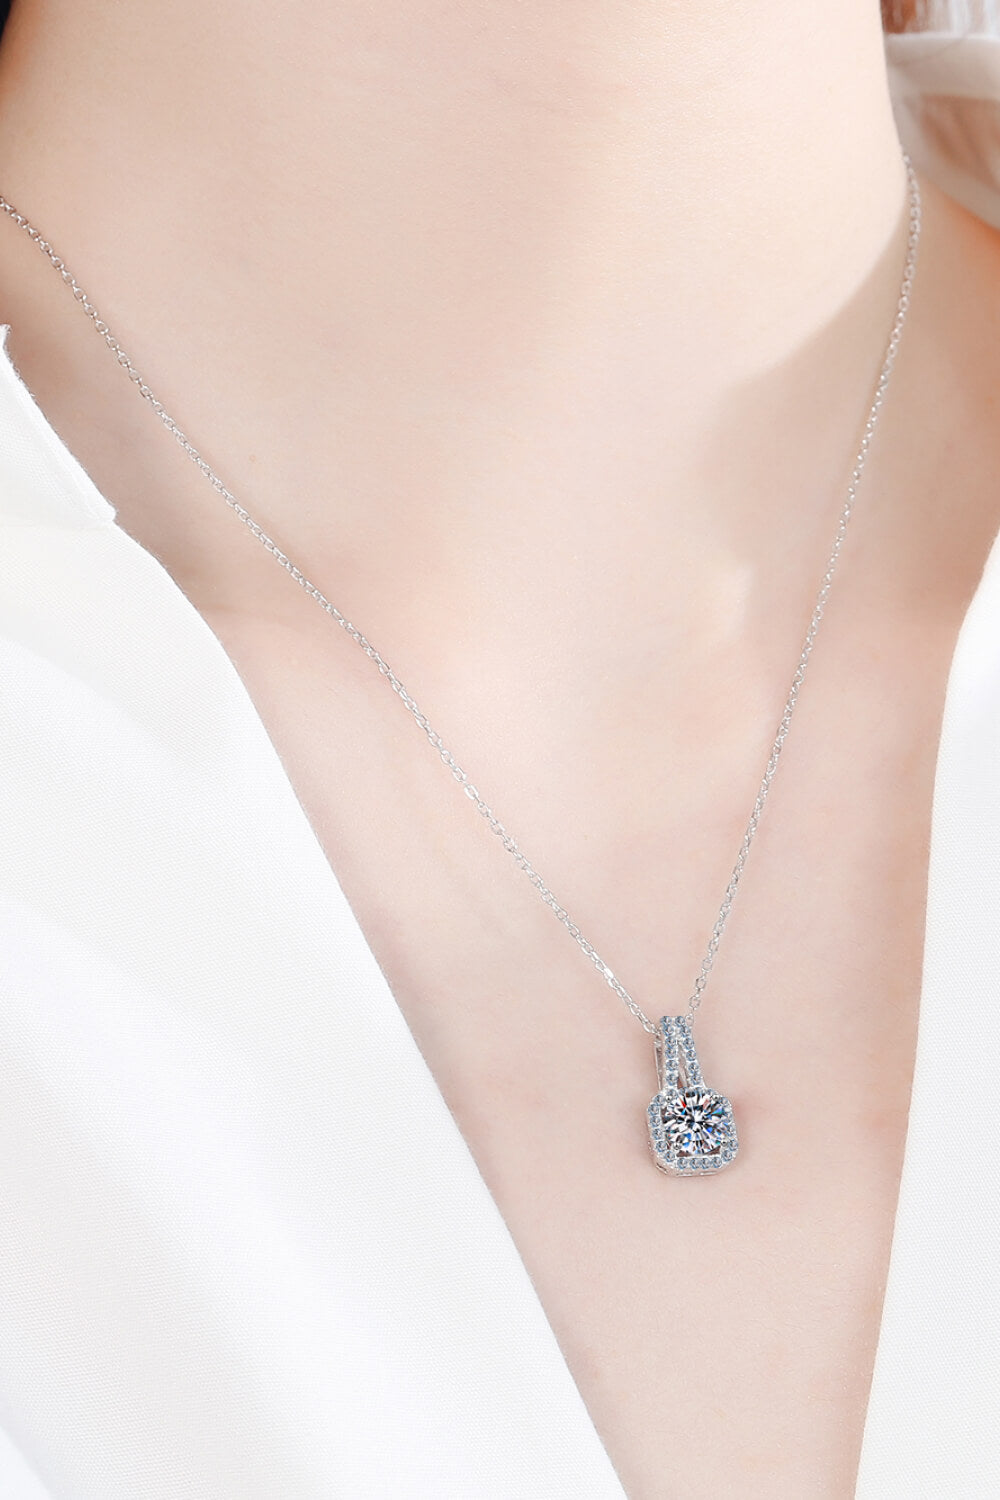 Look Amazing 2 Carat Moissanite Pendant Necklace - Necklaces - FITGGINS